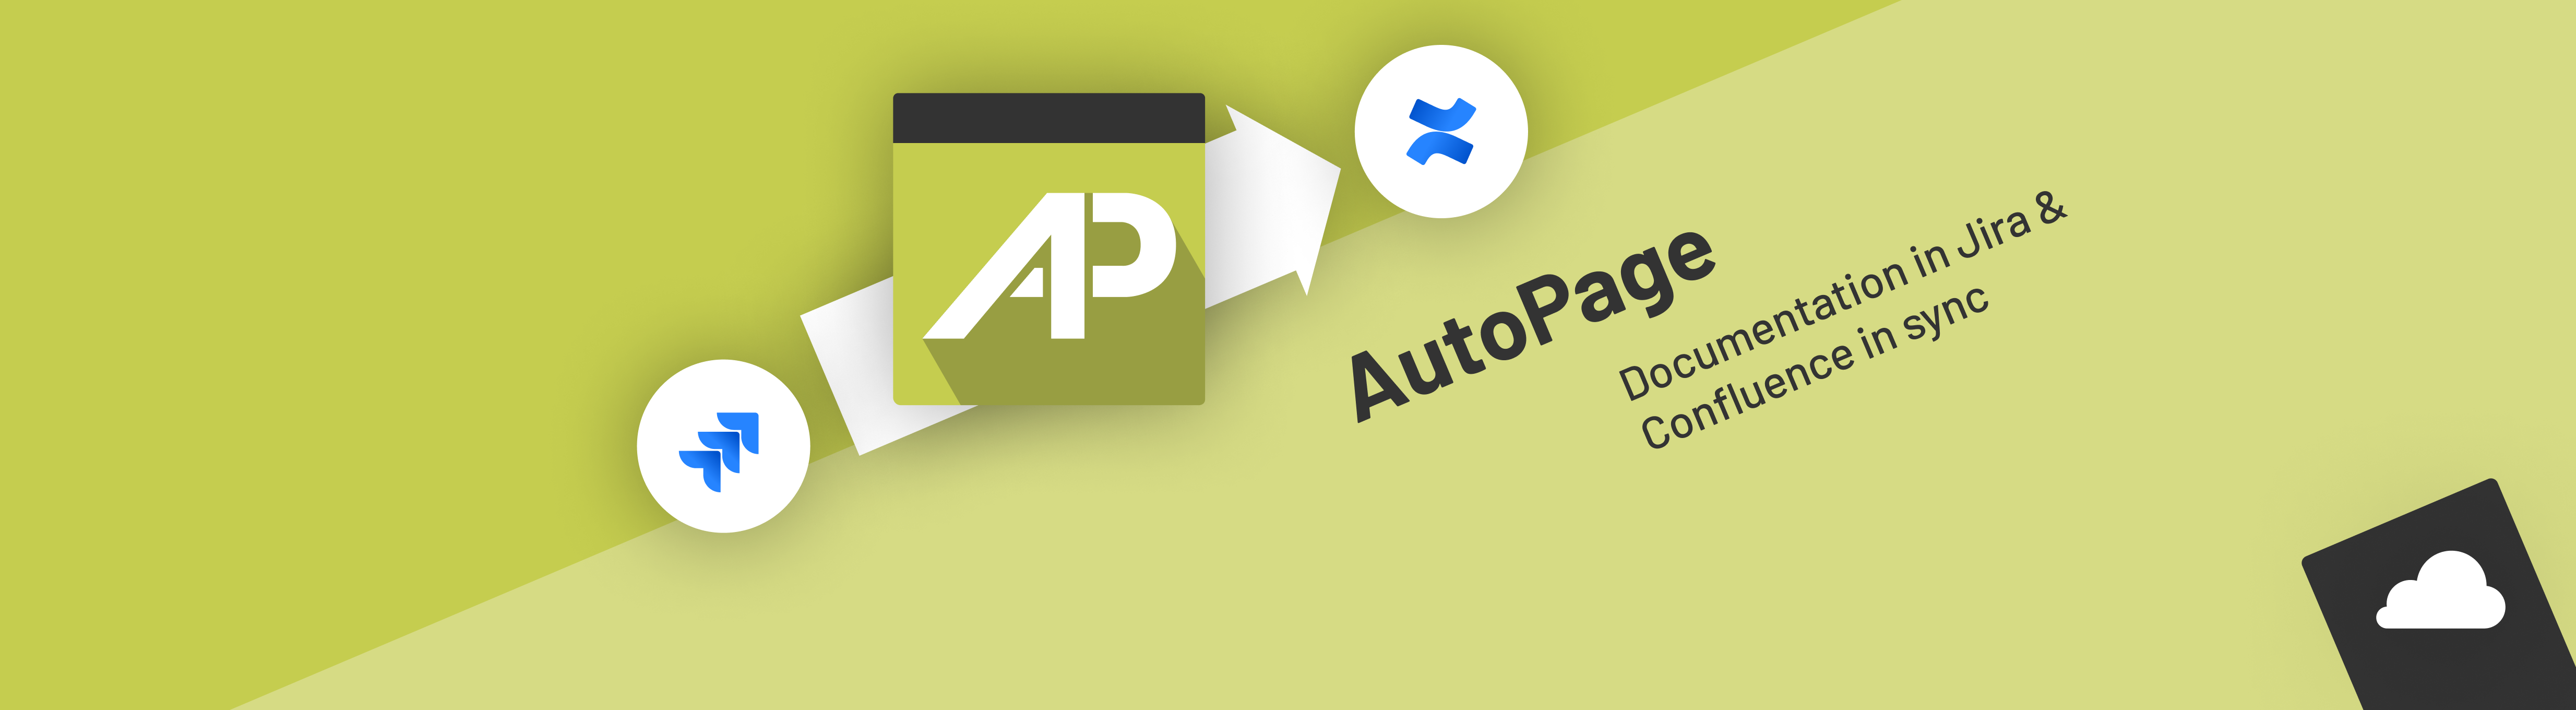 Autopage Goes Cloud - the Easiest Solution for Your Documentation Problems - banner